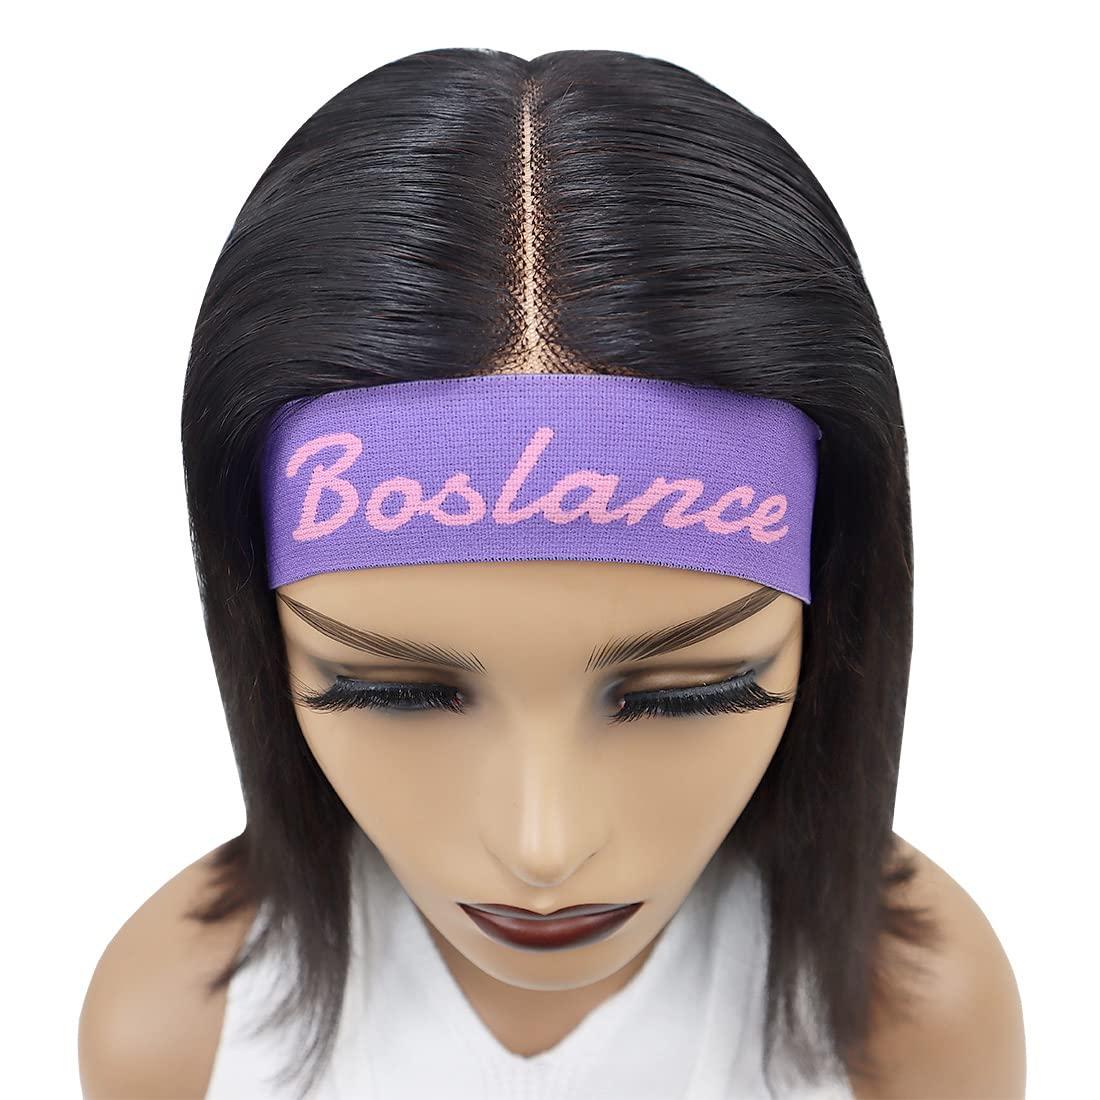 Iraatraa Wig Band Elastic Bands For Wig 3 Pcs Lace Melting Band For Lace  Front Wig Bands For Keeping Wigs In Place Edge Wrap To Lay Edges Melt Band